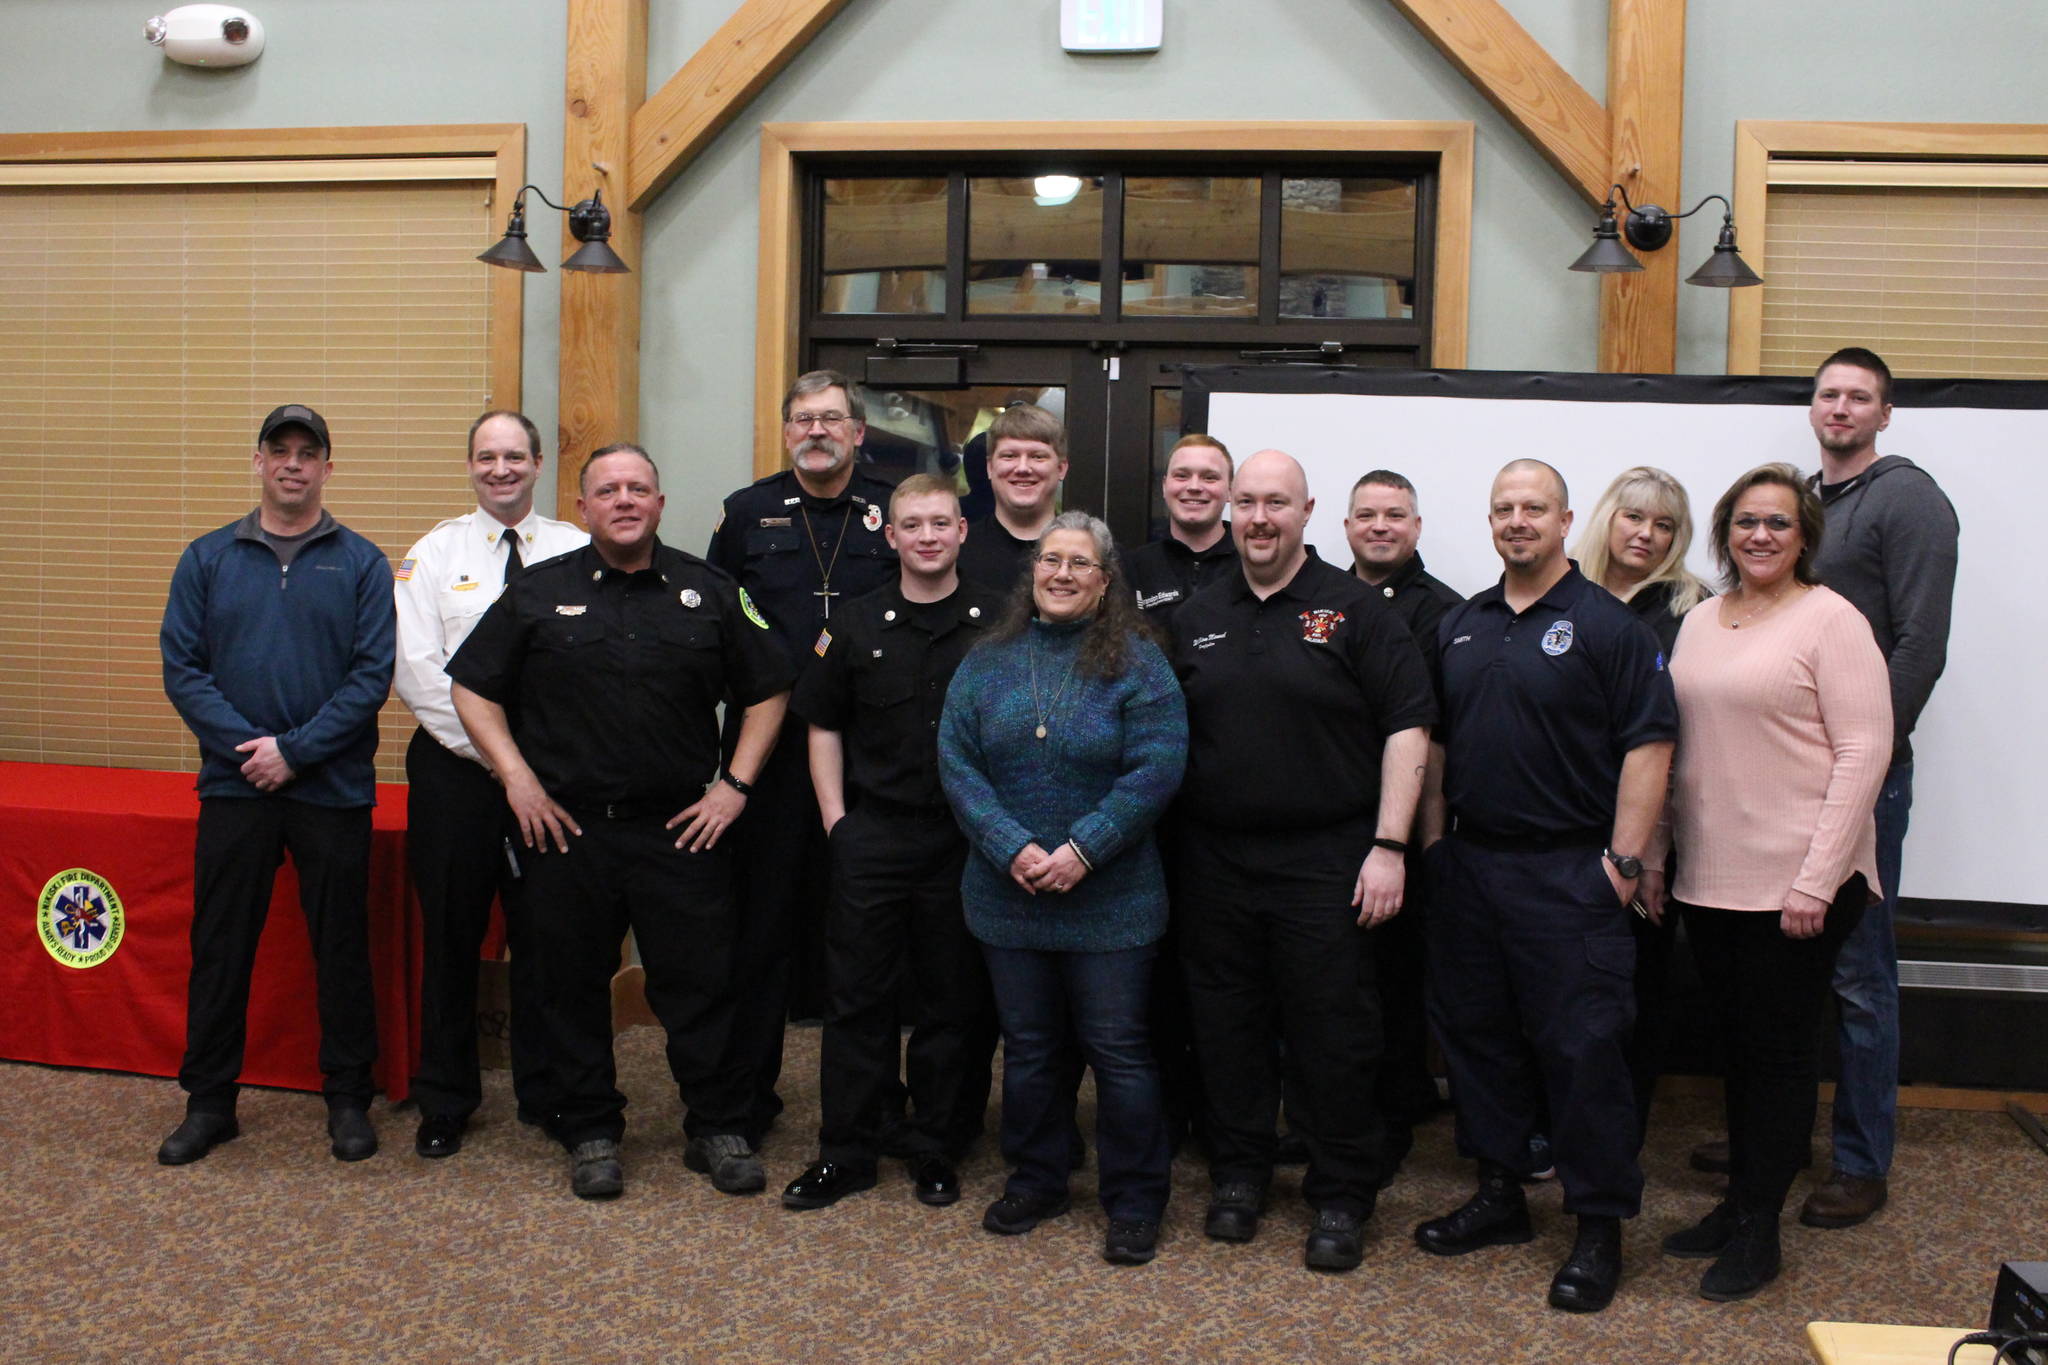 Amy Fisher, center, and the individuals who played a part in saving her life on Oct. 1, 2019 smile for a group photo at the Nikiski Fire Department’s 2019 Award Ceremony in the Nikiski Senior Center on Feb. 28, 2020. From left: Dominic Kuntz, Brian Crisp, JT Harris, Tim Tolar, TJ Cox, Vladislav Glushkov, Amy Fisher, Brandon Edwards, William Manuel, Stephen Robertson, Tony Smith, Laura Osborn, Carol Asp and Tony Besse. (Photo by Brian Mazurek/Peninsula Clarion)